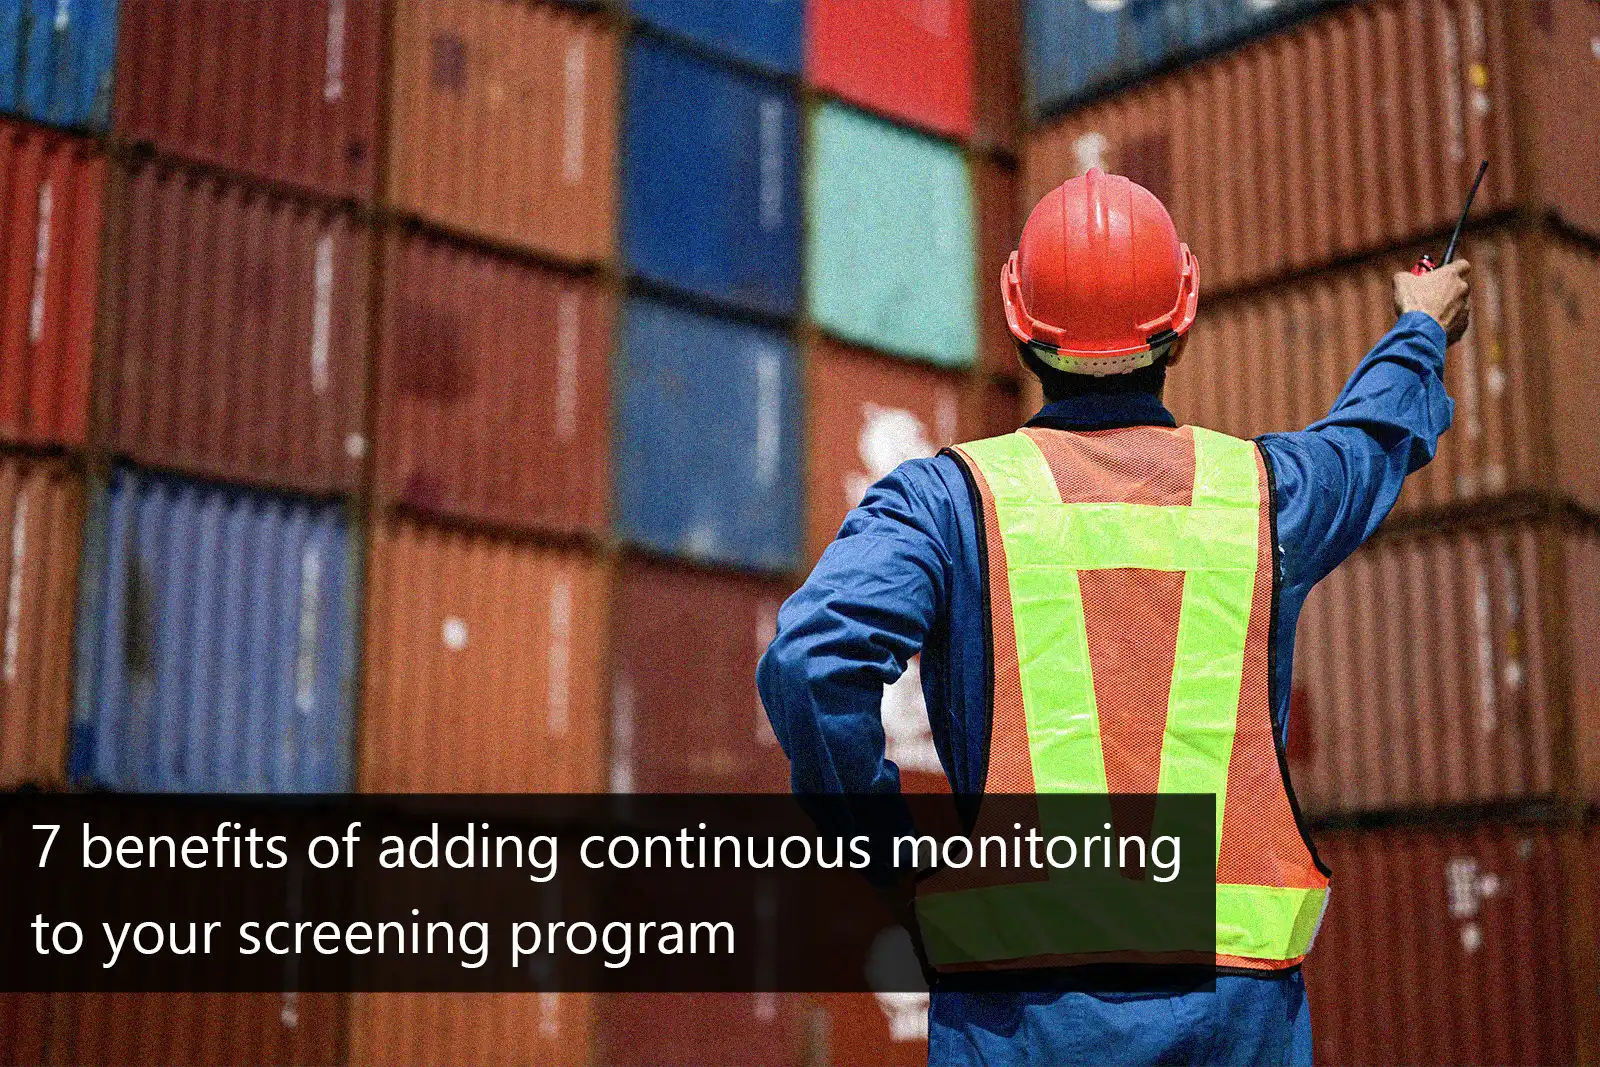 7 benefits of adding continuous monitoring to your screening program